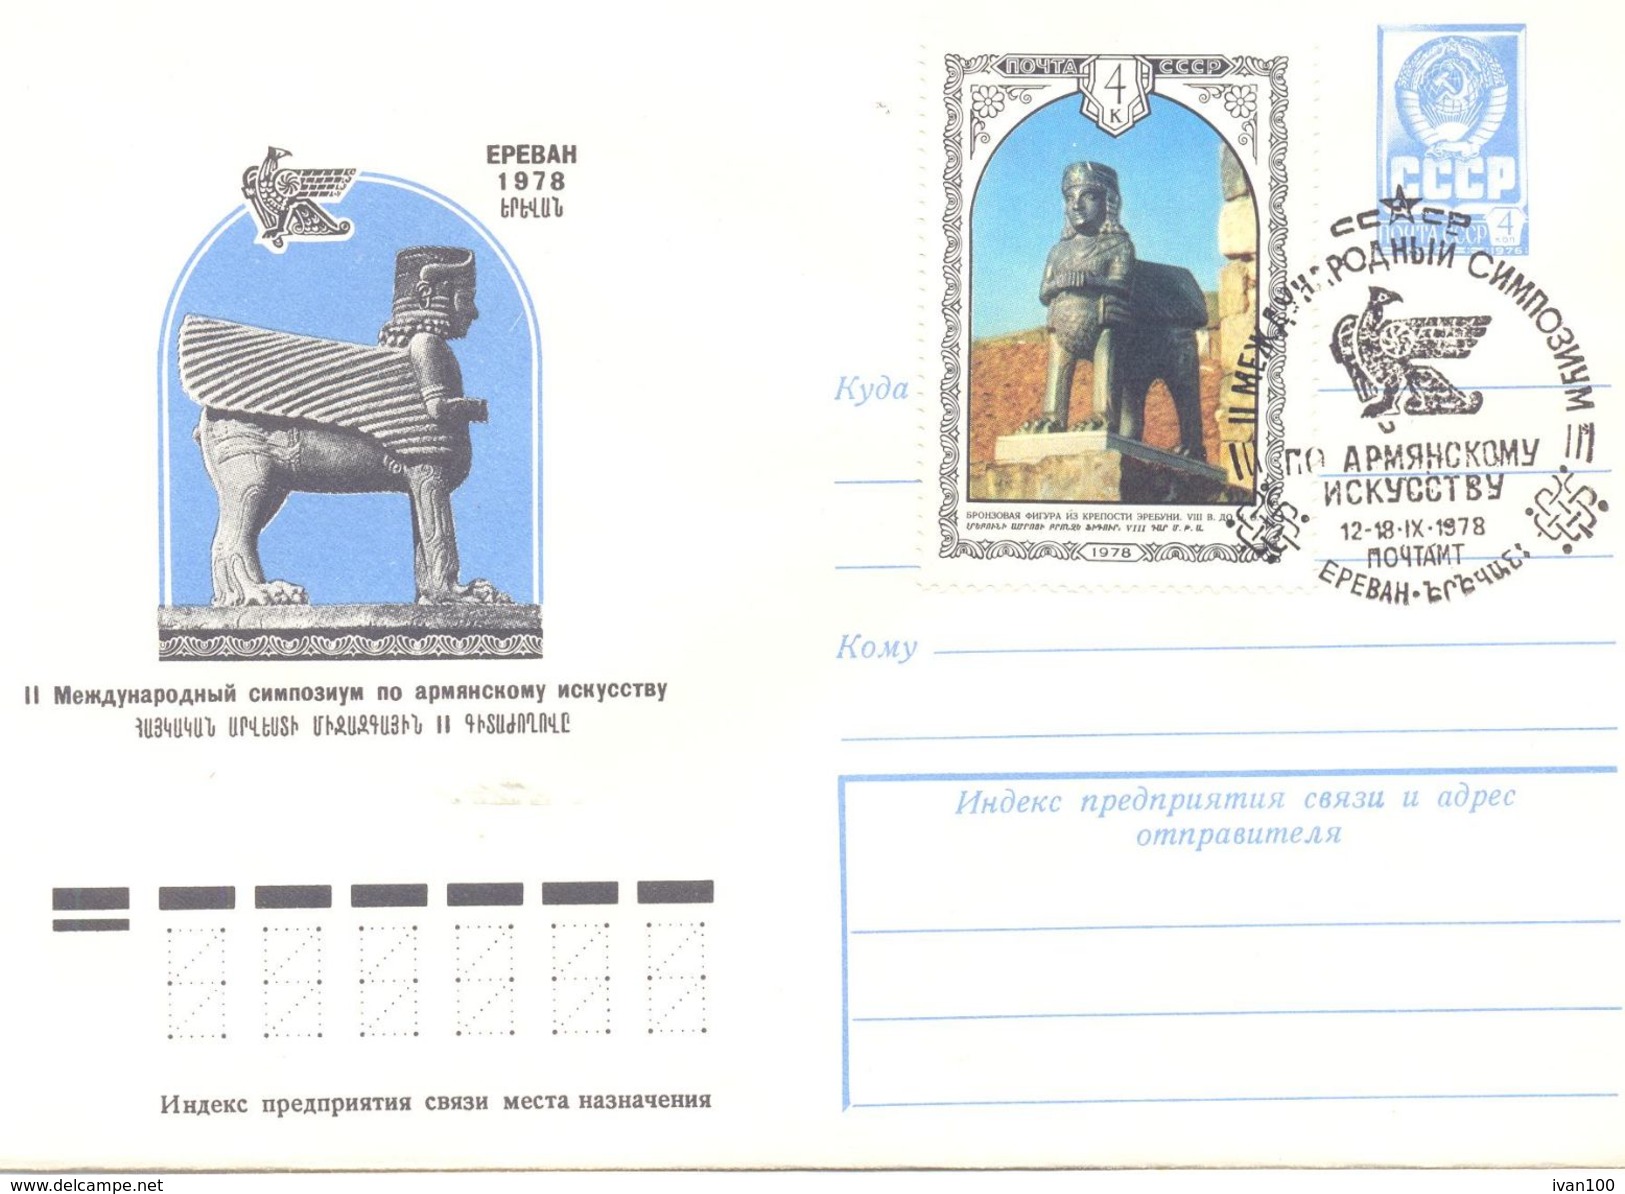 1978. USSR/Russia,  IIth International Symposium  By Armenian Art, Erevan, Postal Cover With Postmark - Covers & Documents